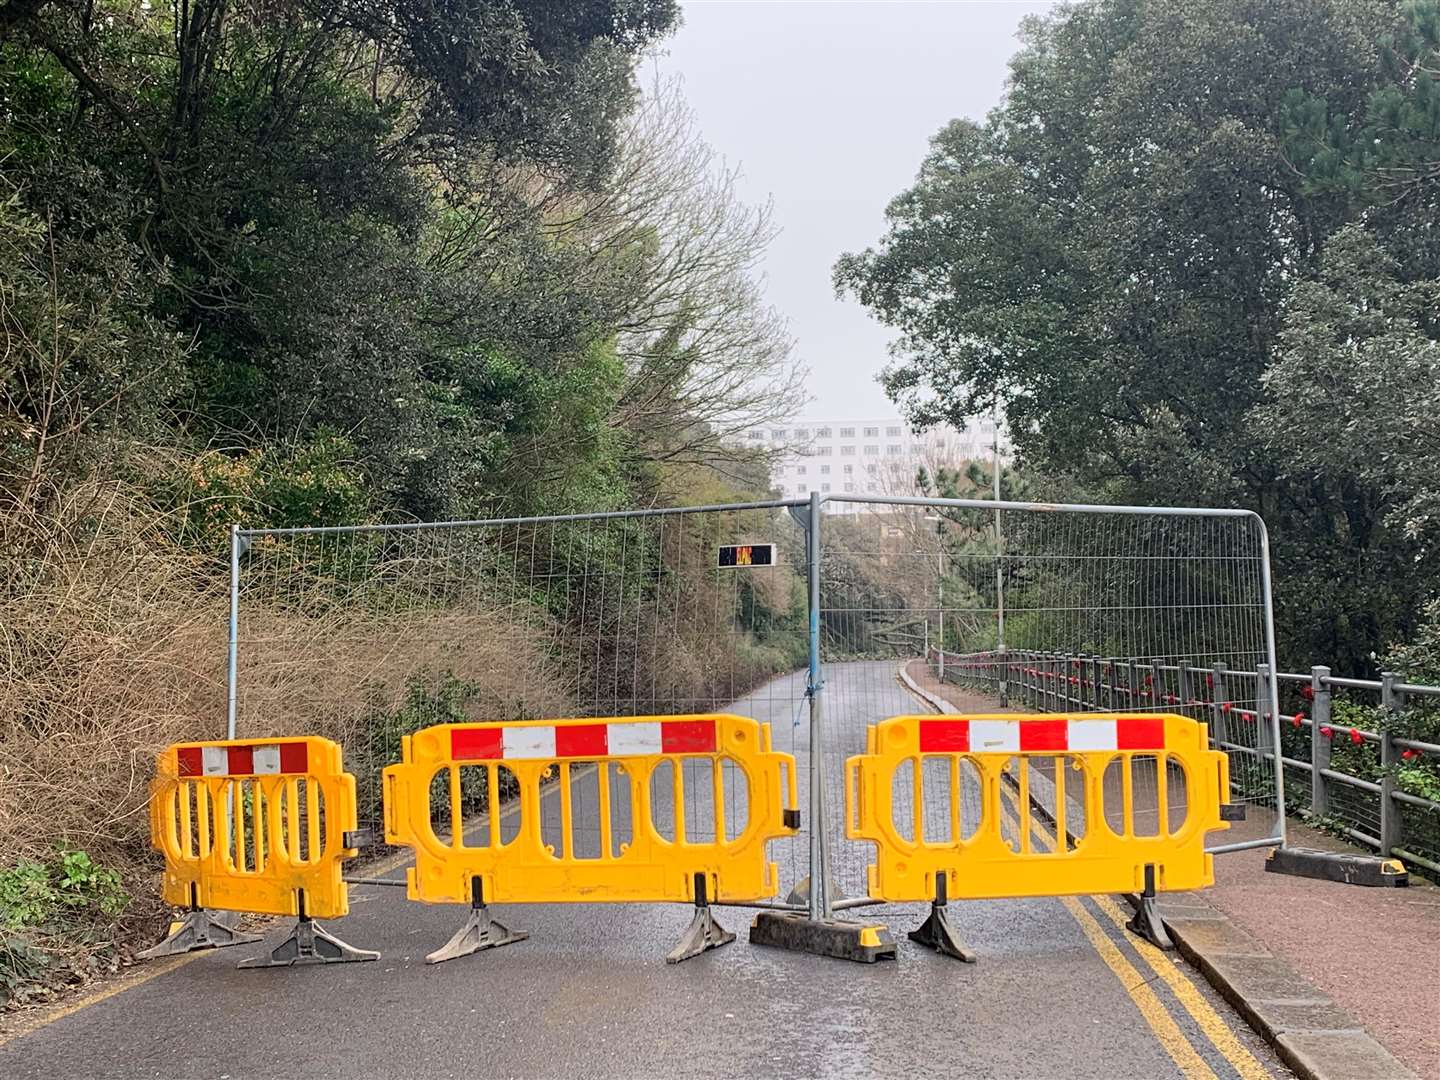 There is currently no timeframe for the reopening of the road